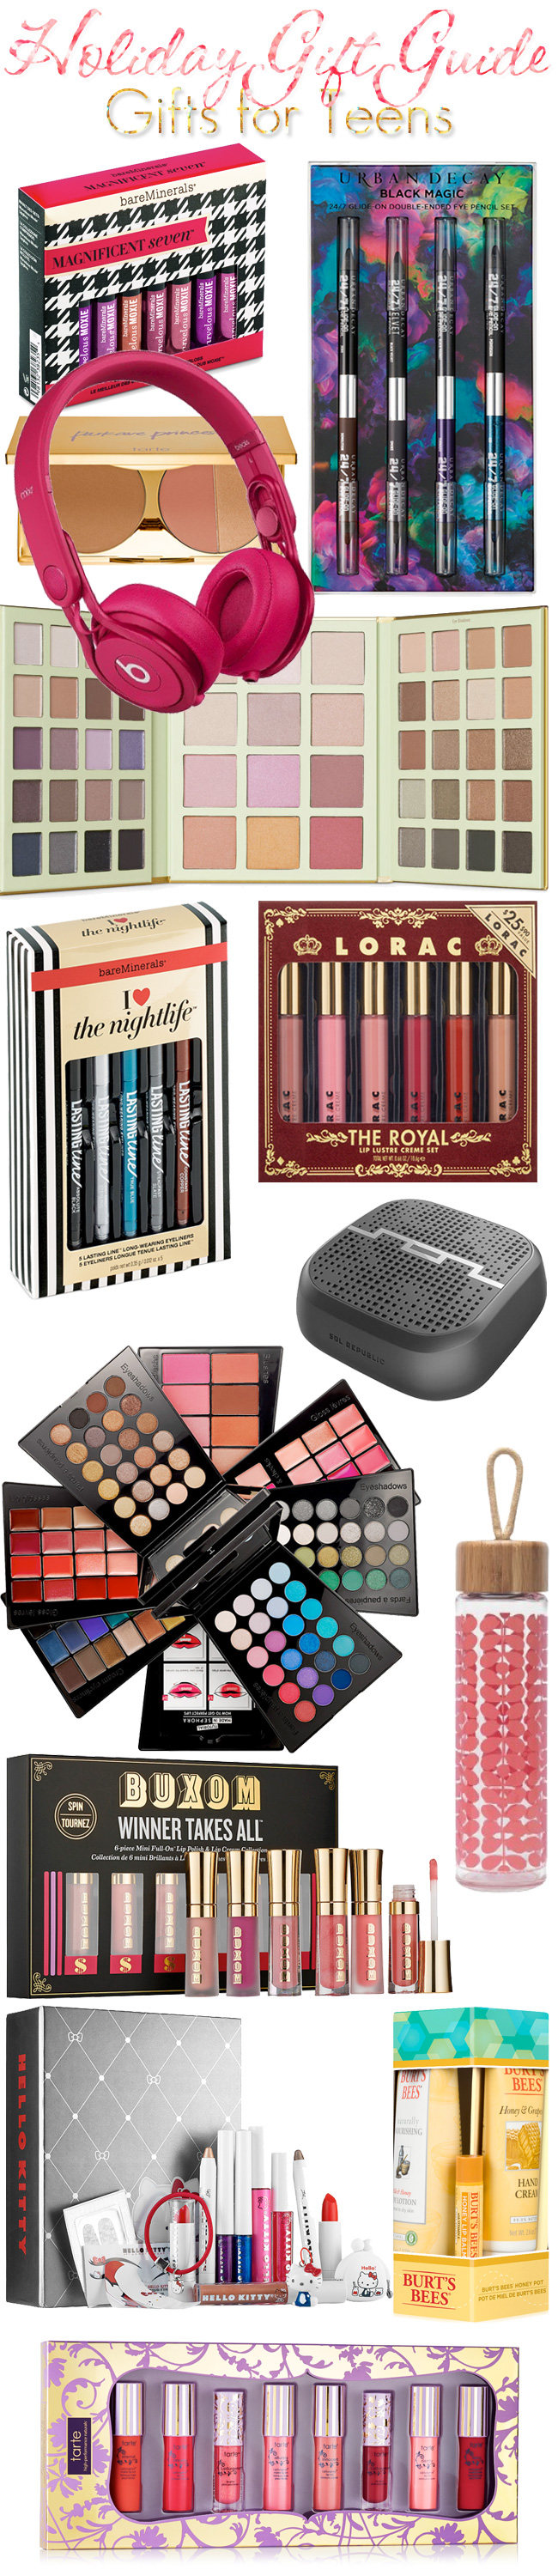 Holiday Gift Guide 2014: Gifts for ...